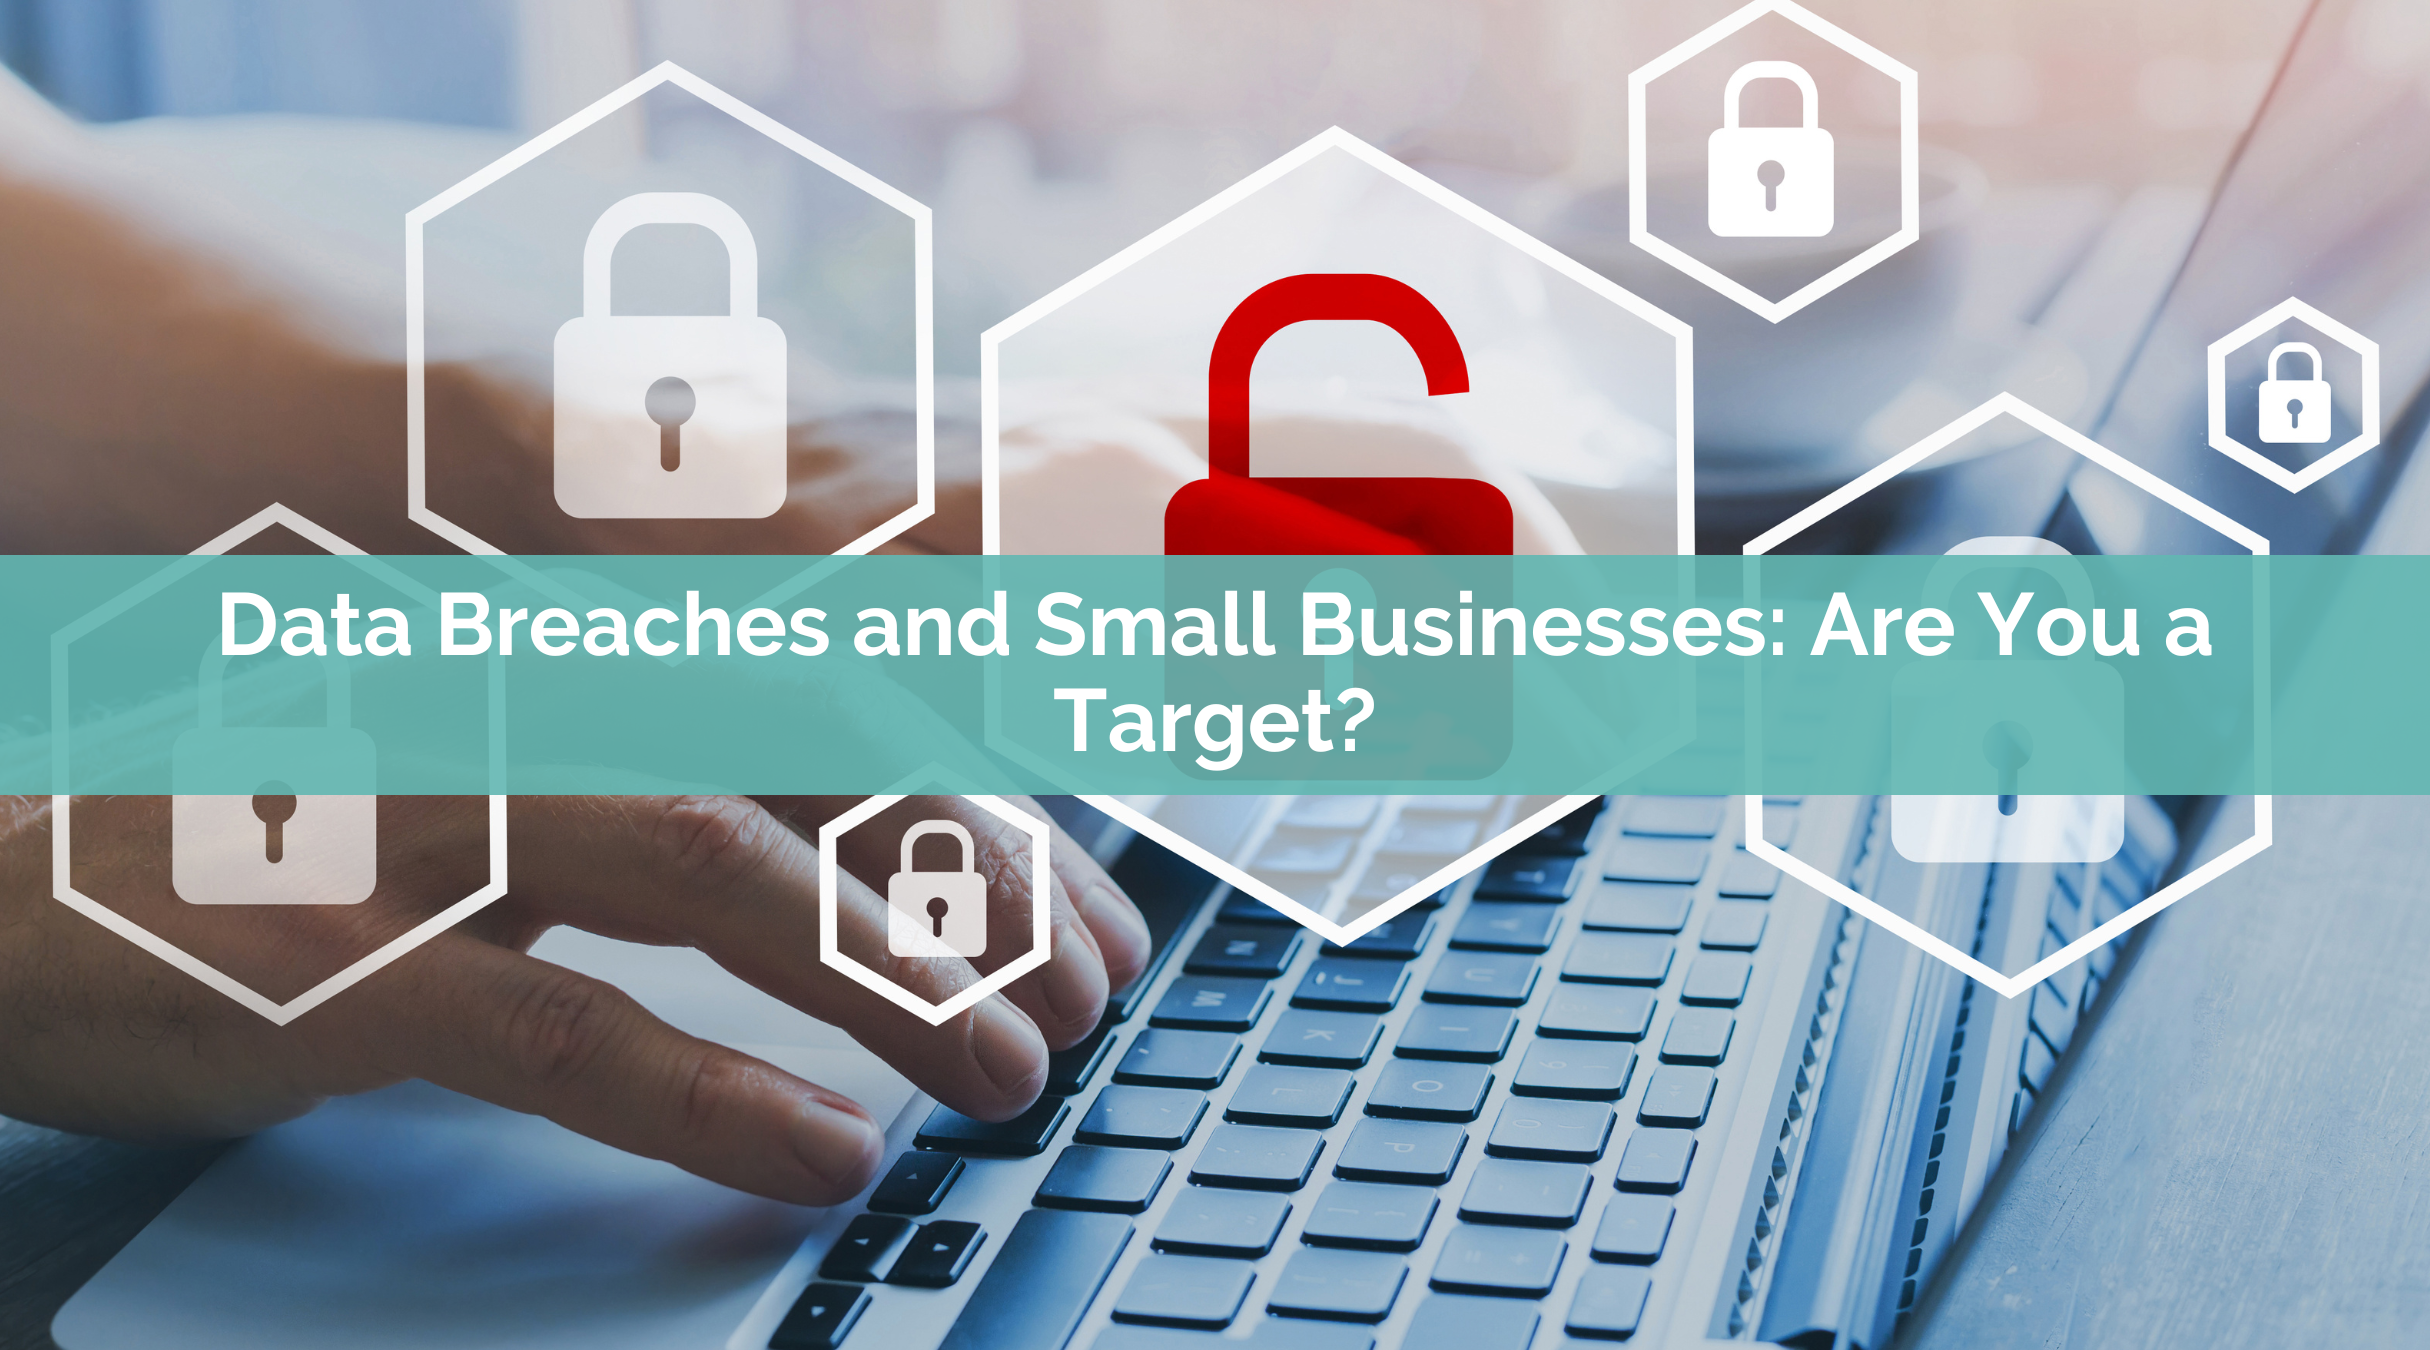 Data Breaches and Small Businesses: Are You a Target?